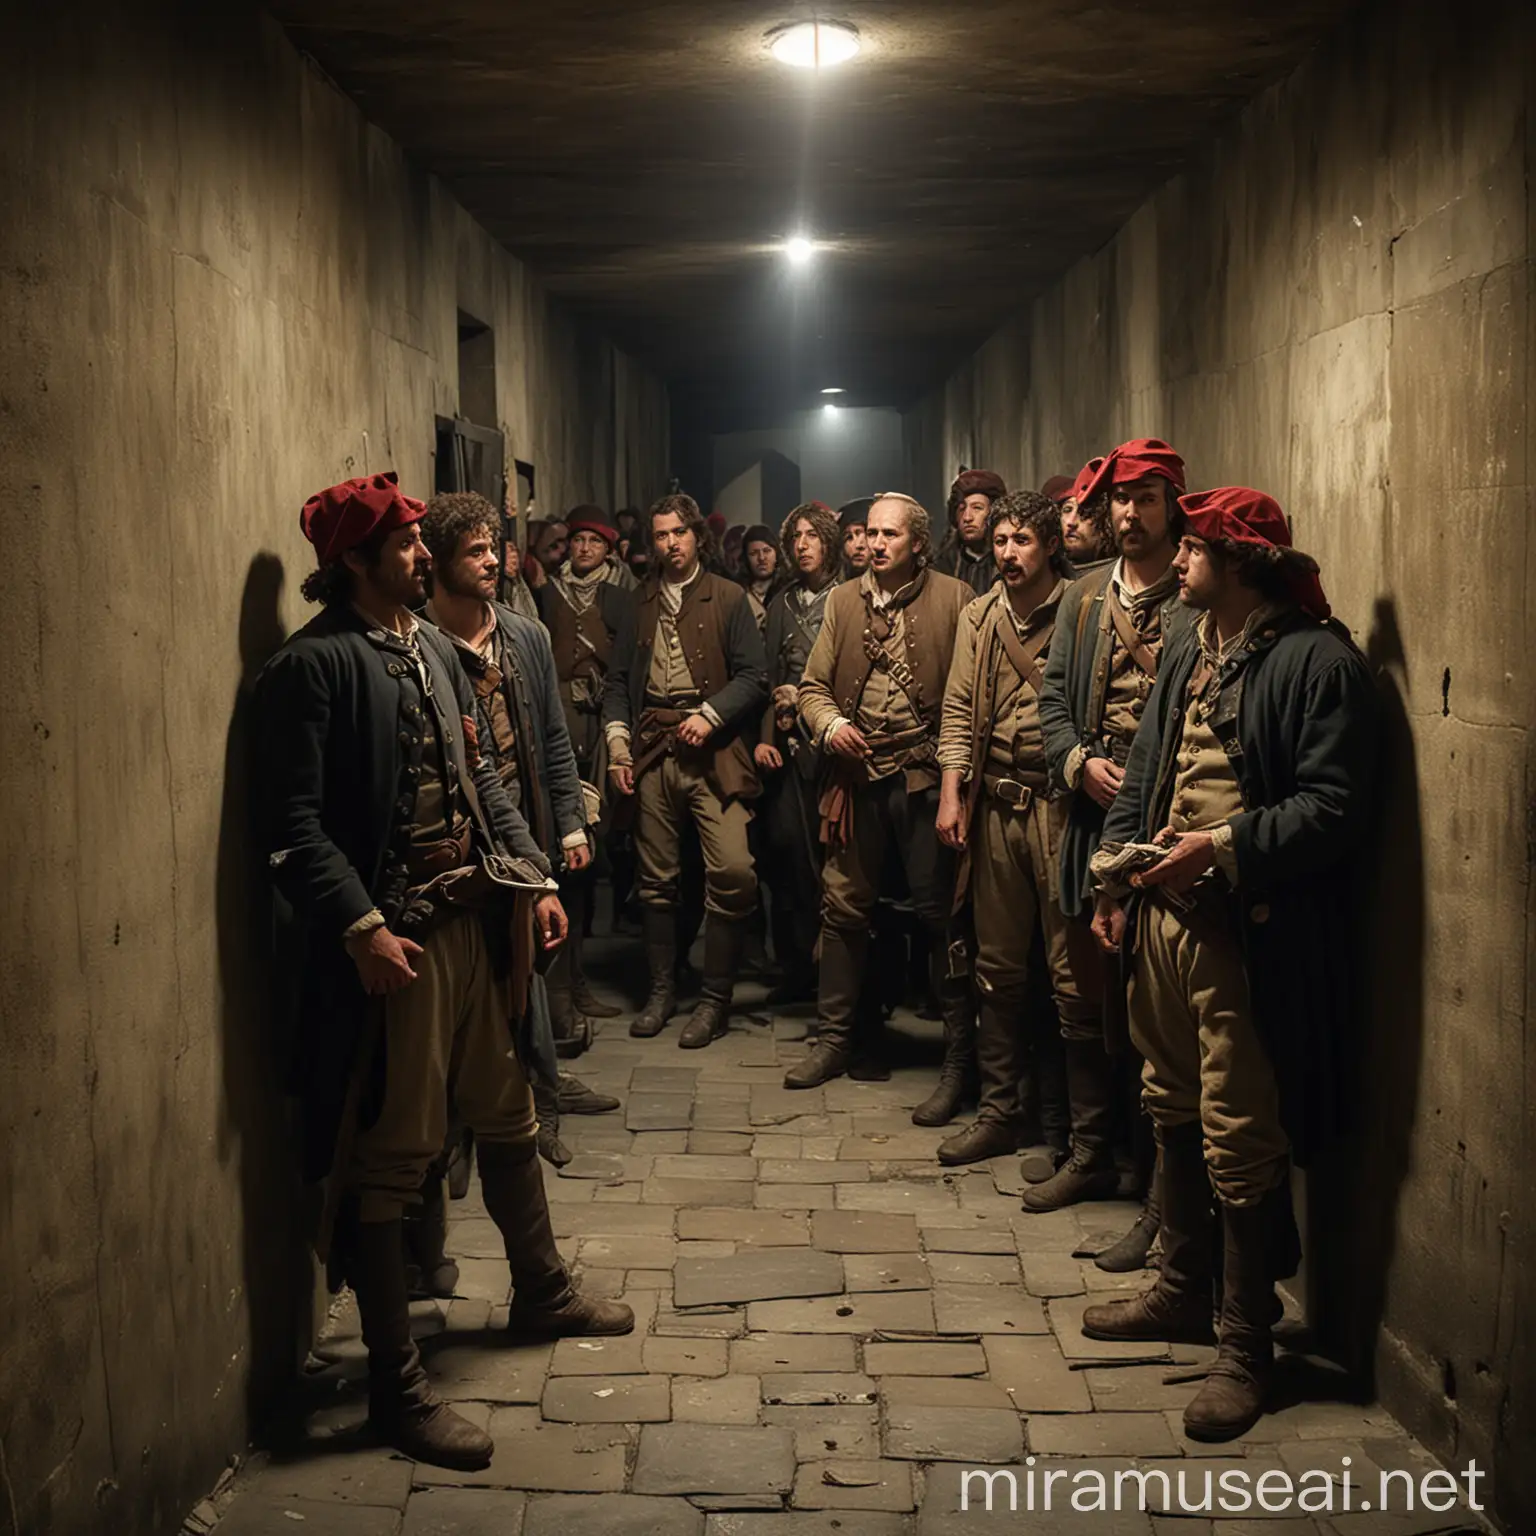 A surprising scene of revolutionaries inside the Bastille, discovering only a few prisoners in the dark, empty cells.